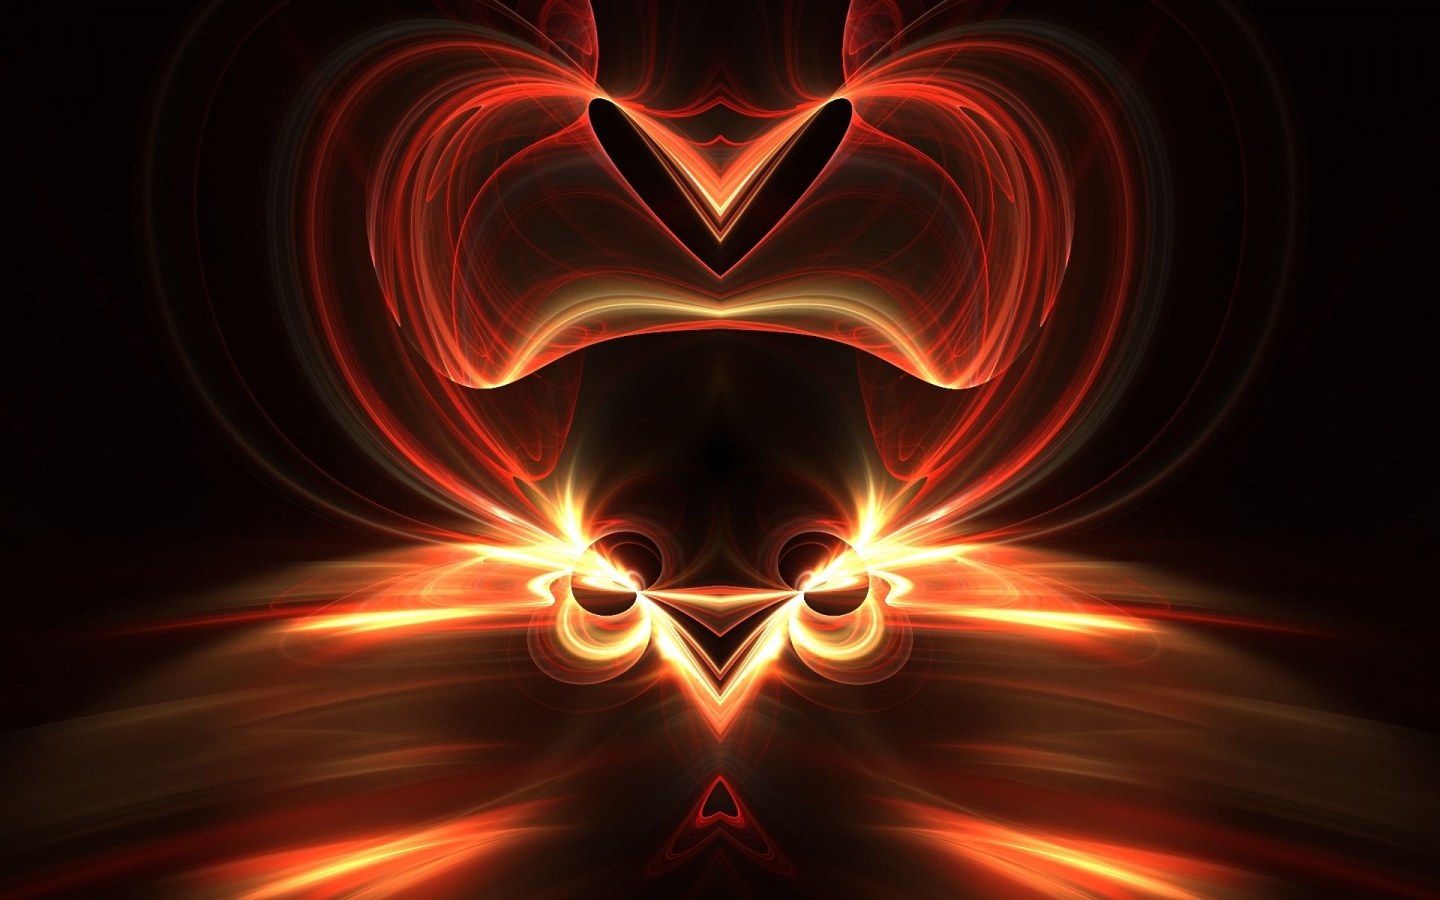 fire heart images free download - Clip Art Library